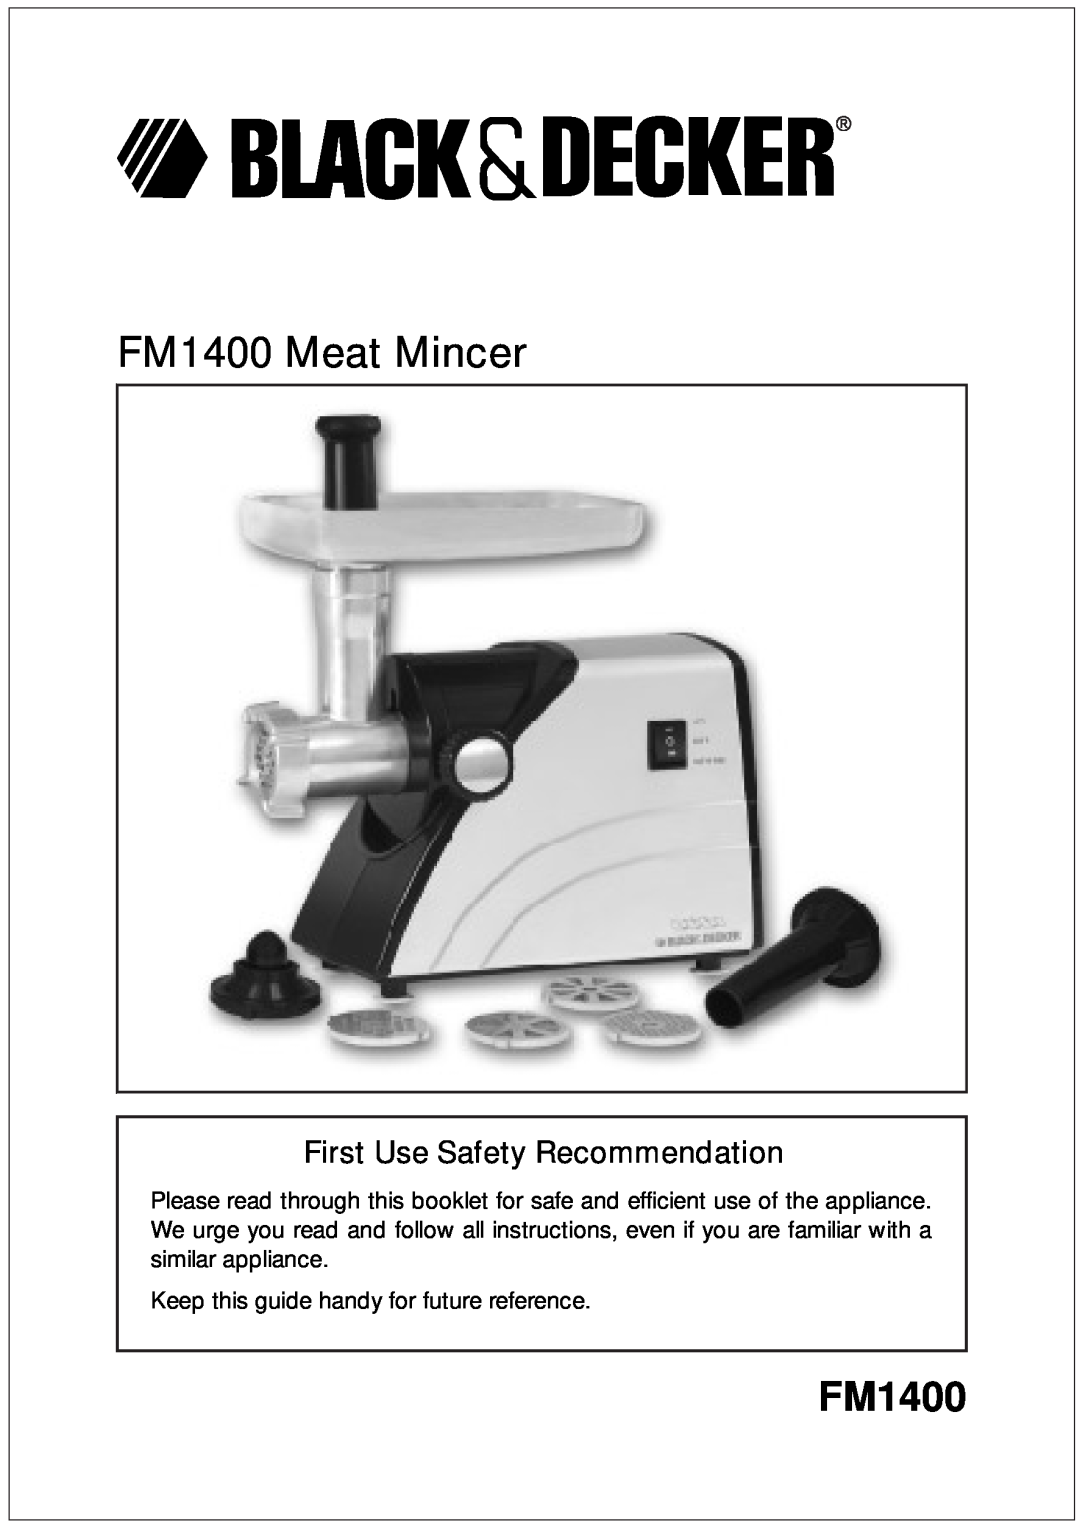 Black & Decker manual FM1400 Meat Mincer, First Use Safety Recommendation 